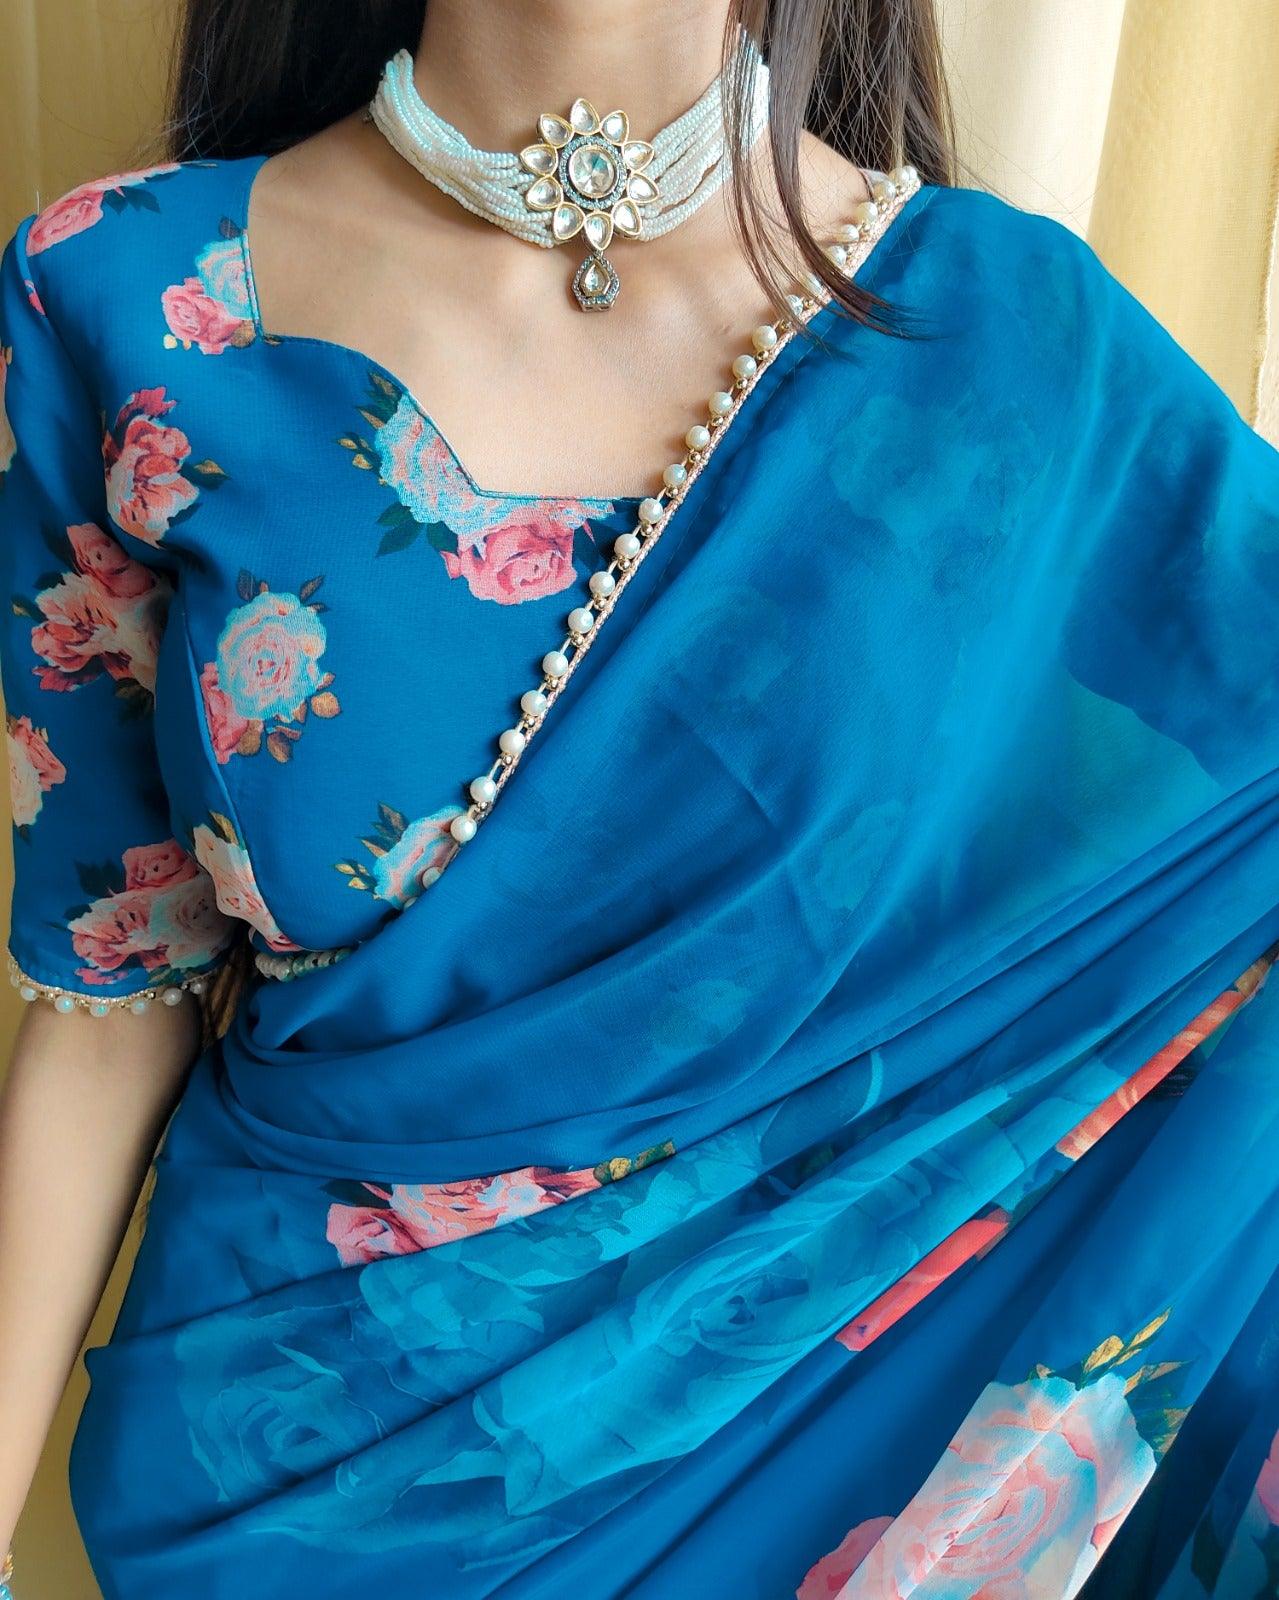 Blue Floral Summer Classy Georgette Printed Saree with Pearl Lace Border - Inayakhan Shop 